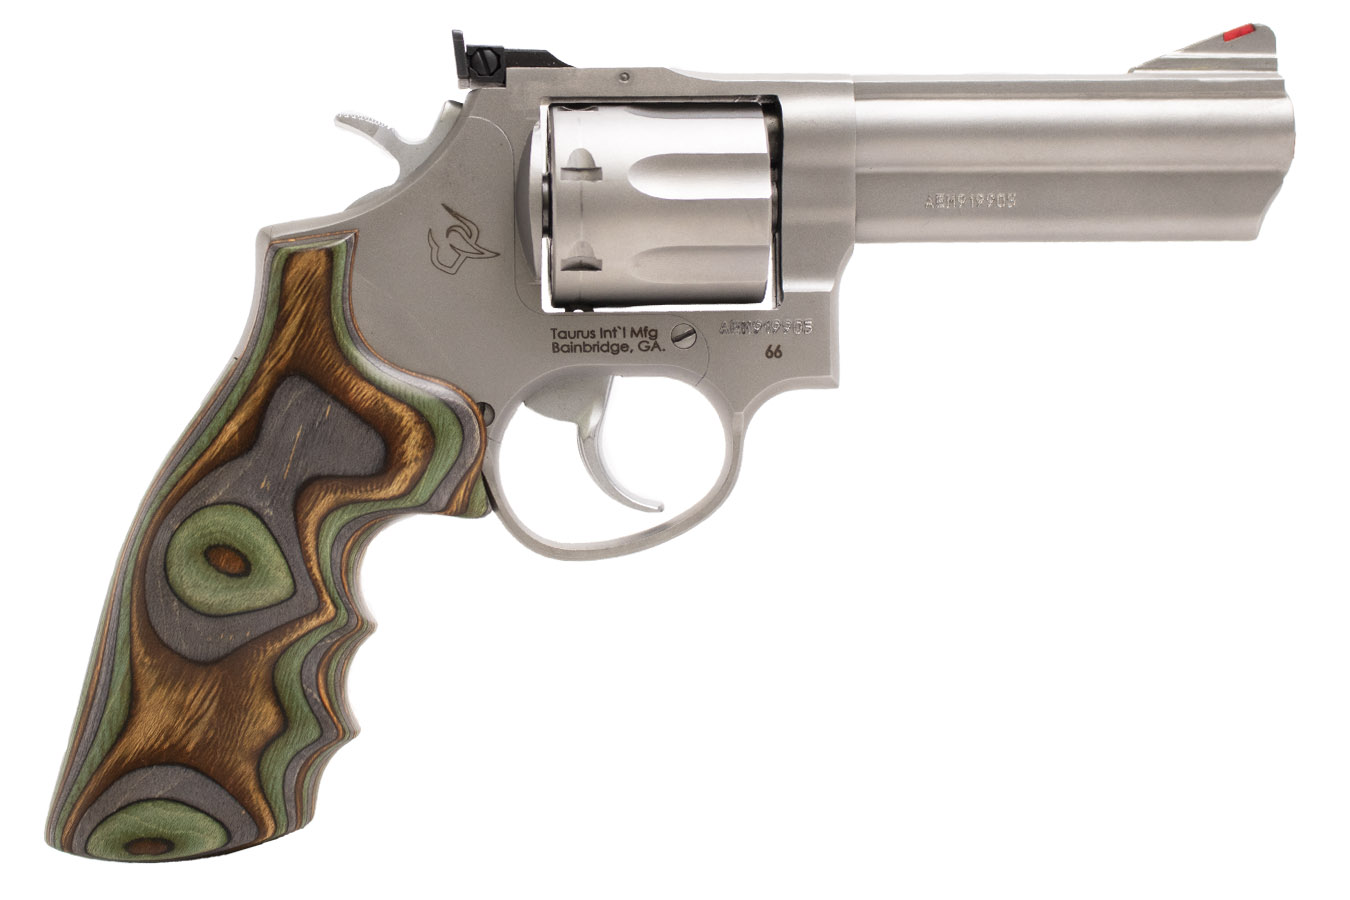 No. 7 Best Selling: TAURUS M66 357MAG SS 4 IN 7 RDS CAMO WOOD GRIPS